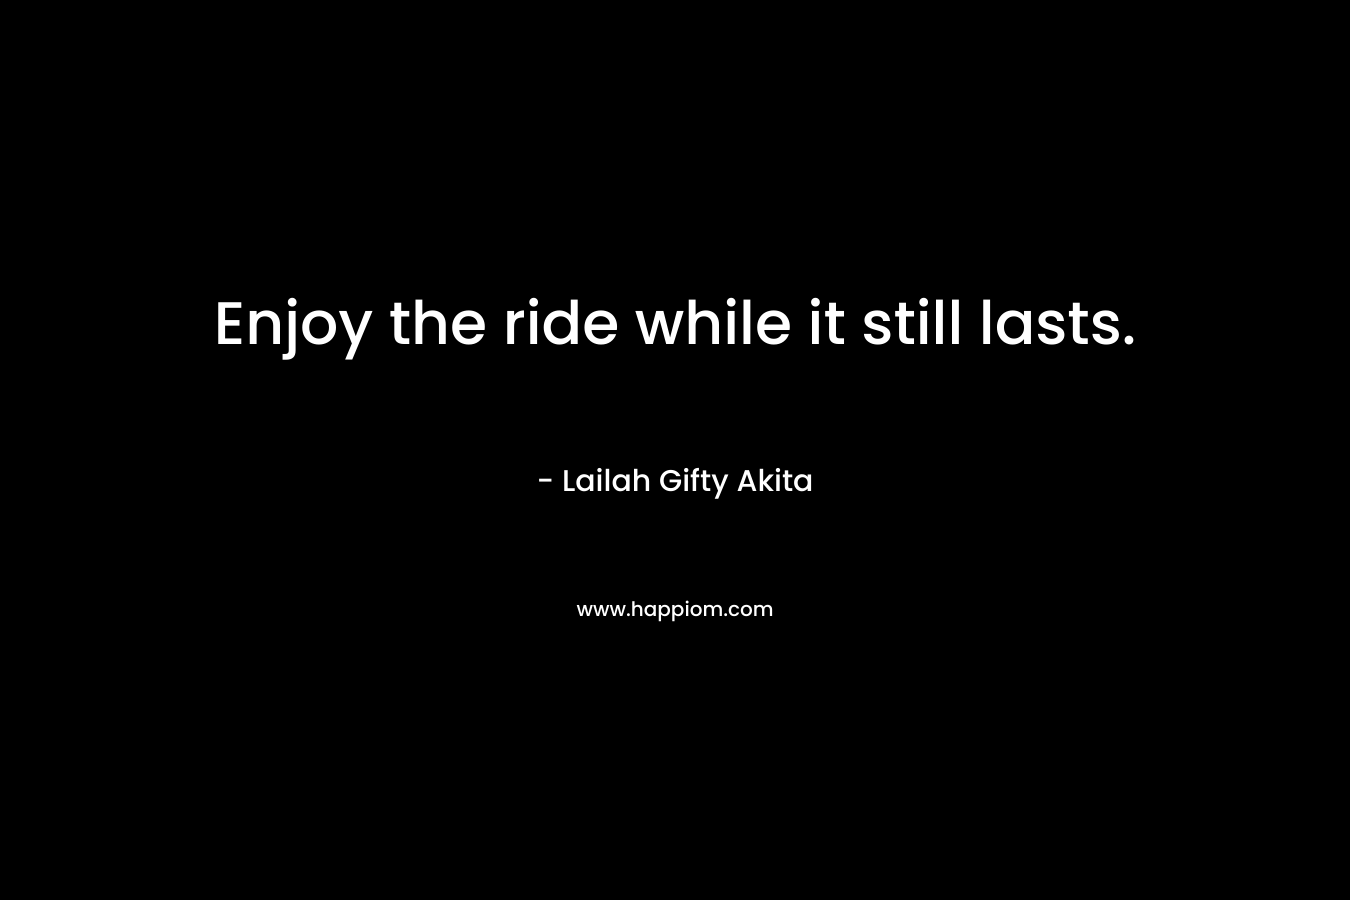 Enjoy the ride while it still lasts.